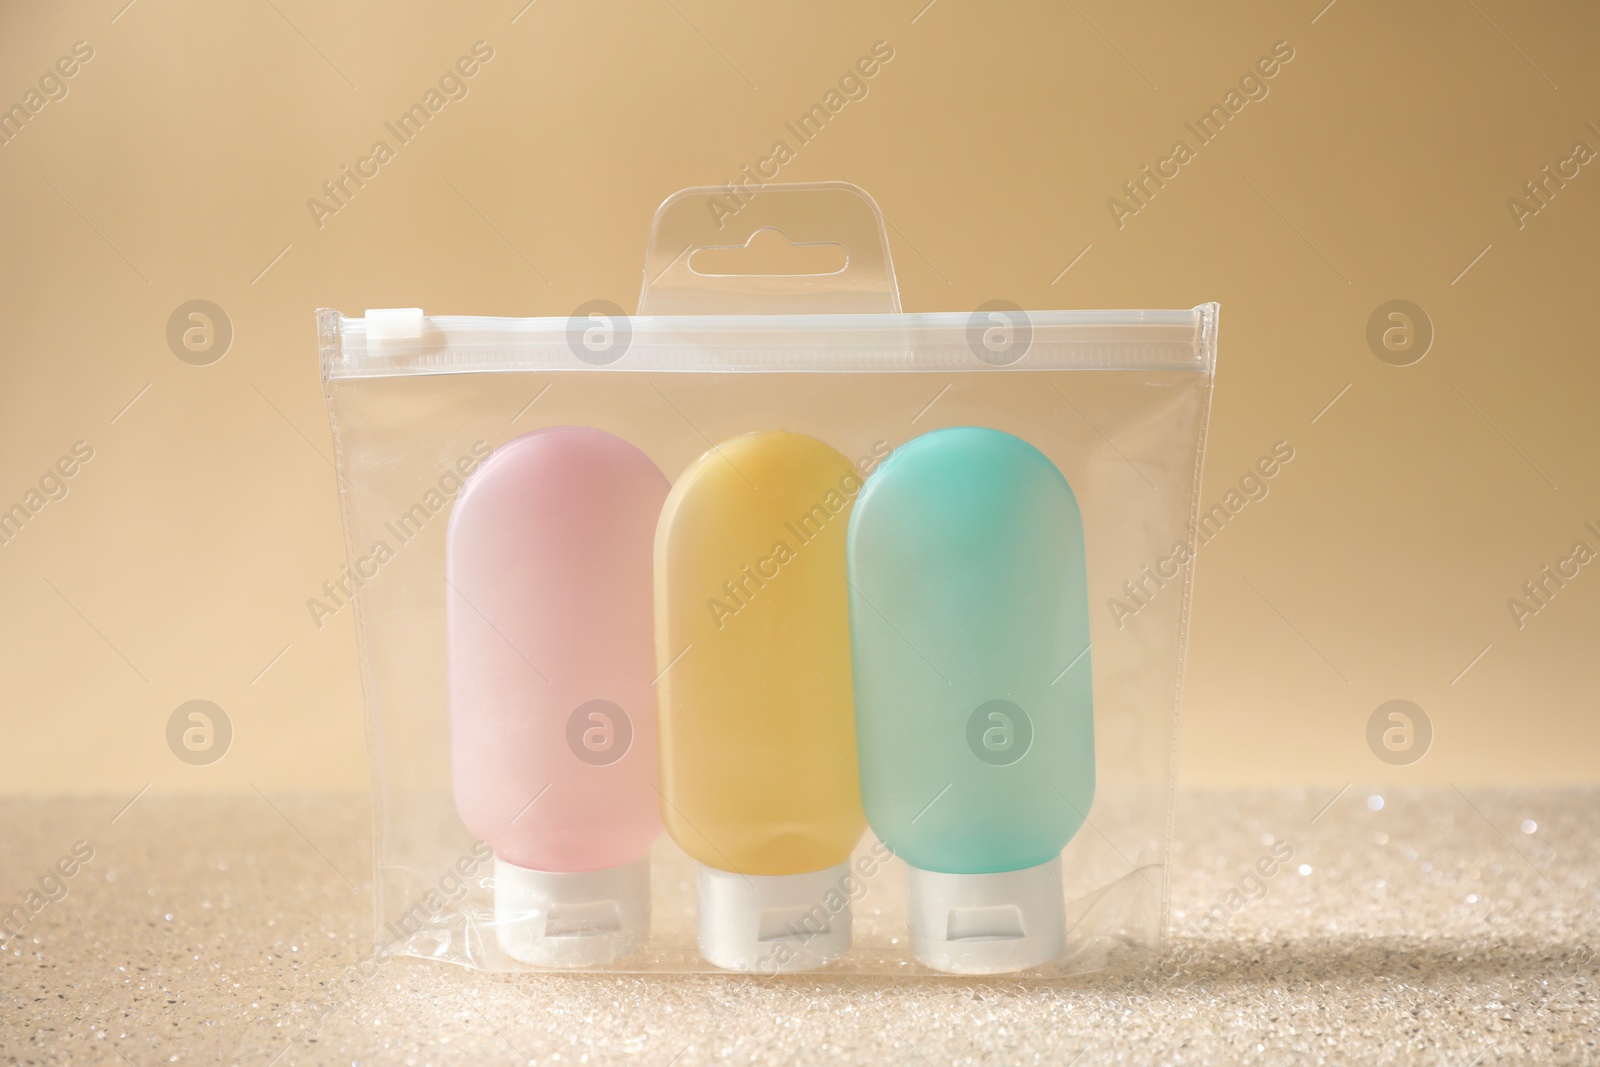 Photo of Cosmetic travel kit in plastic bag on beige background. Bath accessories